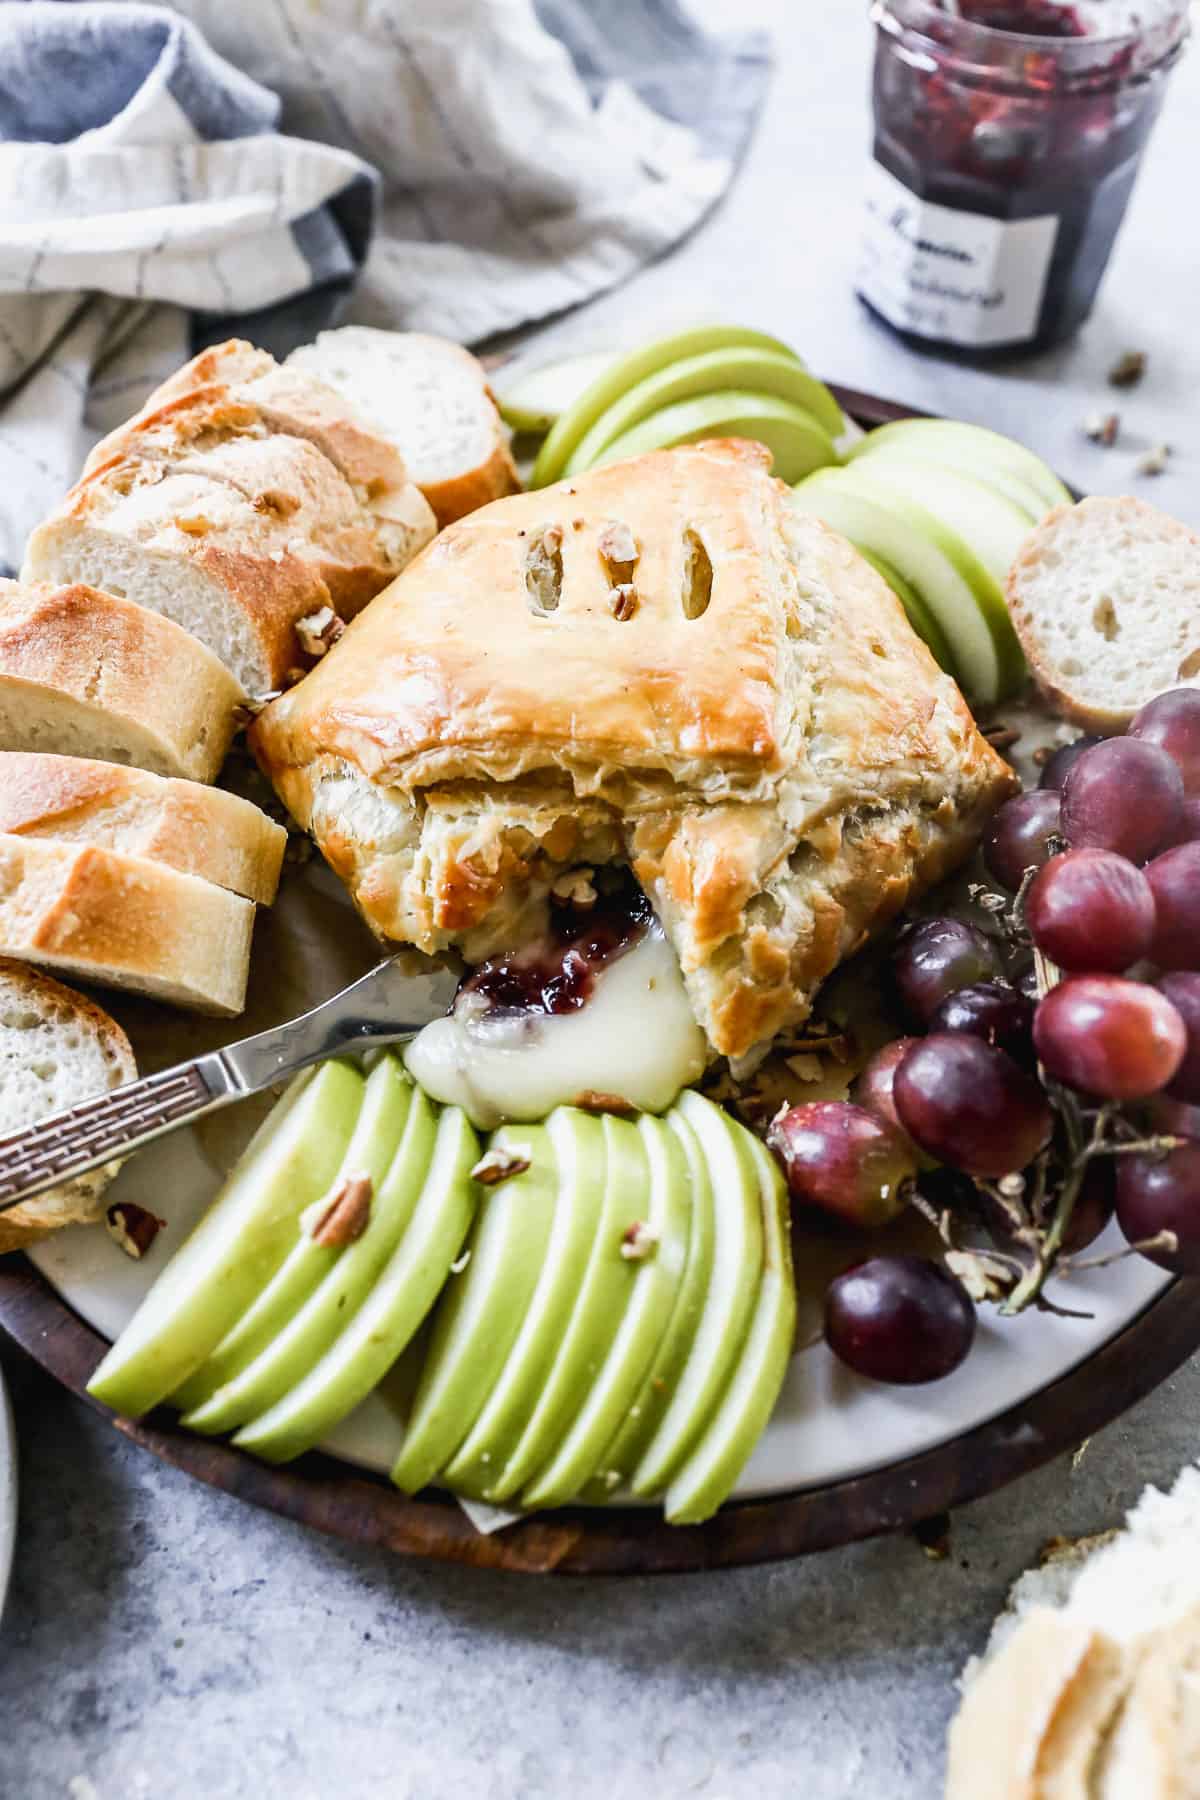 Baked Brie puff pastry on a platter surrounded by apples, grapes, and bread.